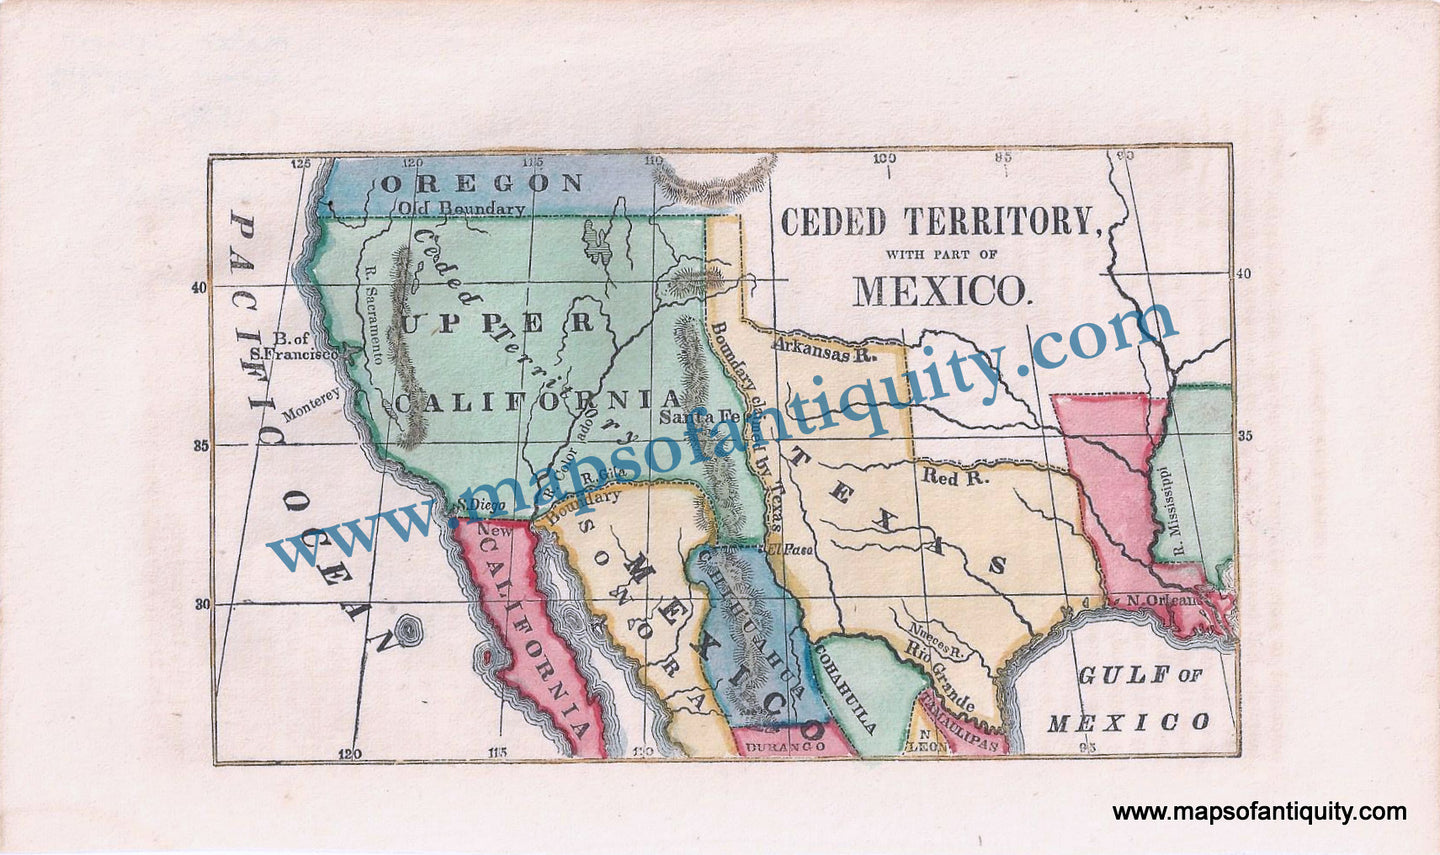 Antique-Hand-Colored-Map-Ceded-Territory-with-part-of-Mexico.-**********-United-States-West-c.-1850-unknown-Maps-Of-Antiquity